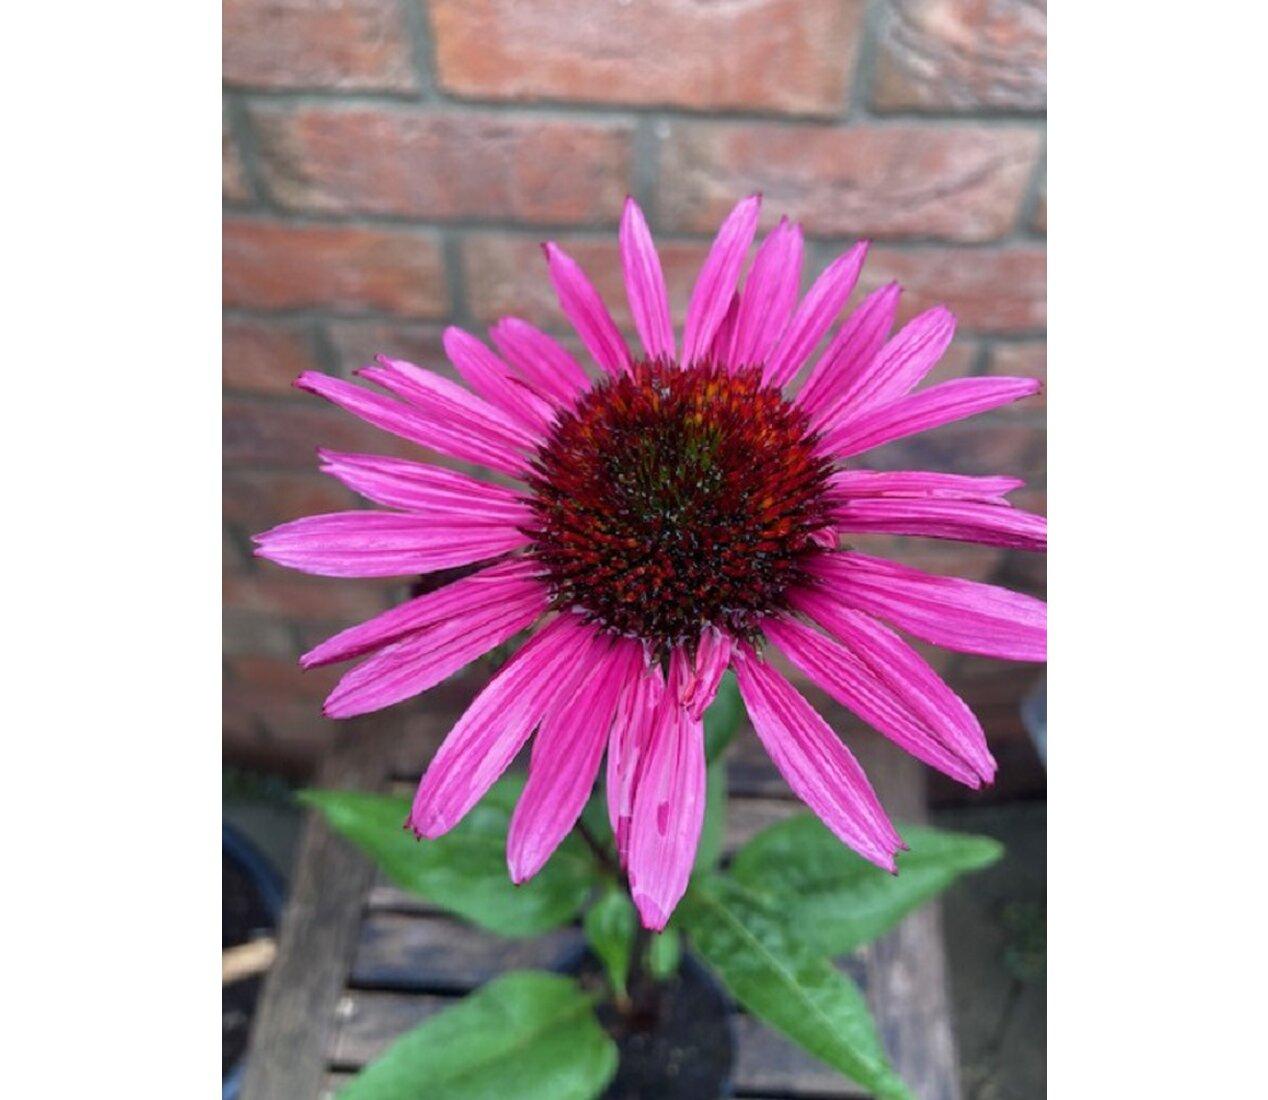 Echinacea Fatal Attraction